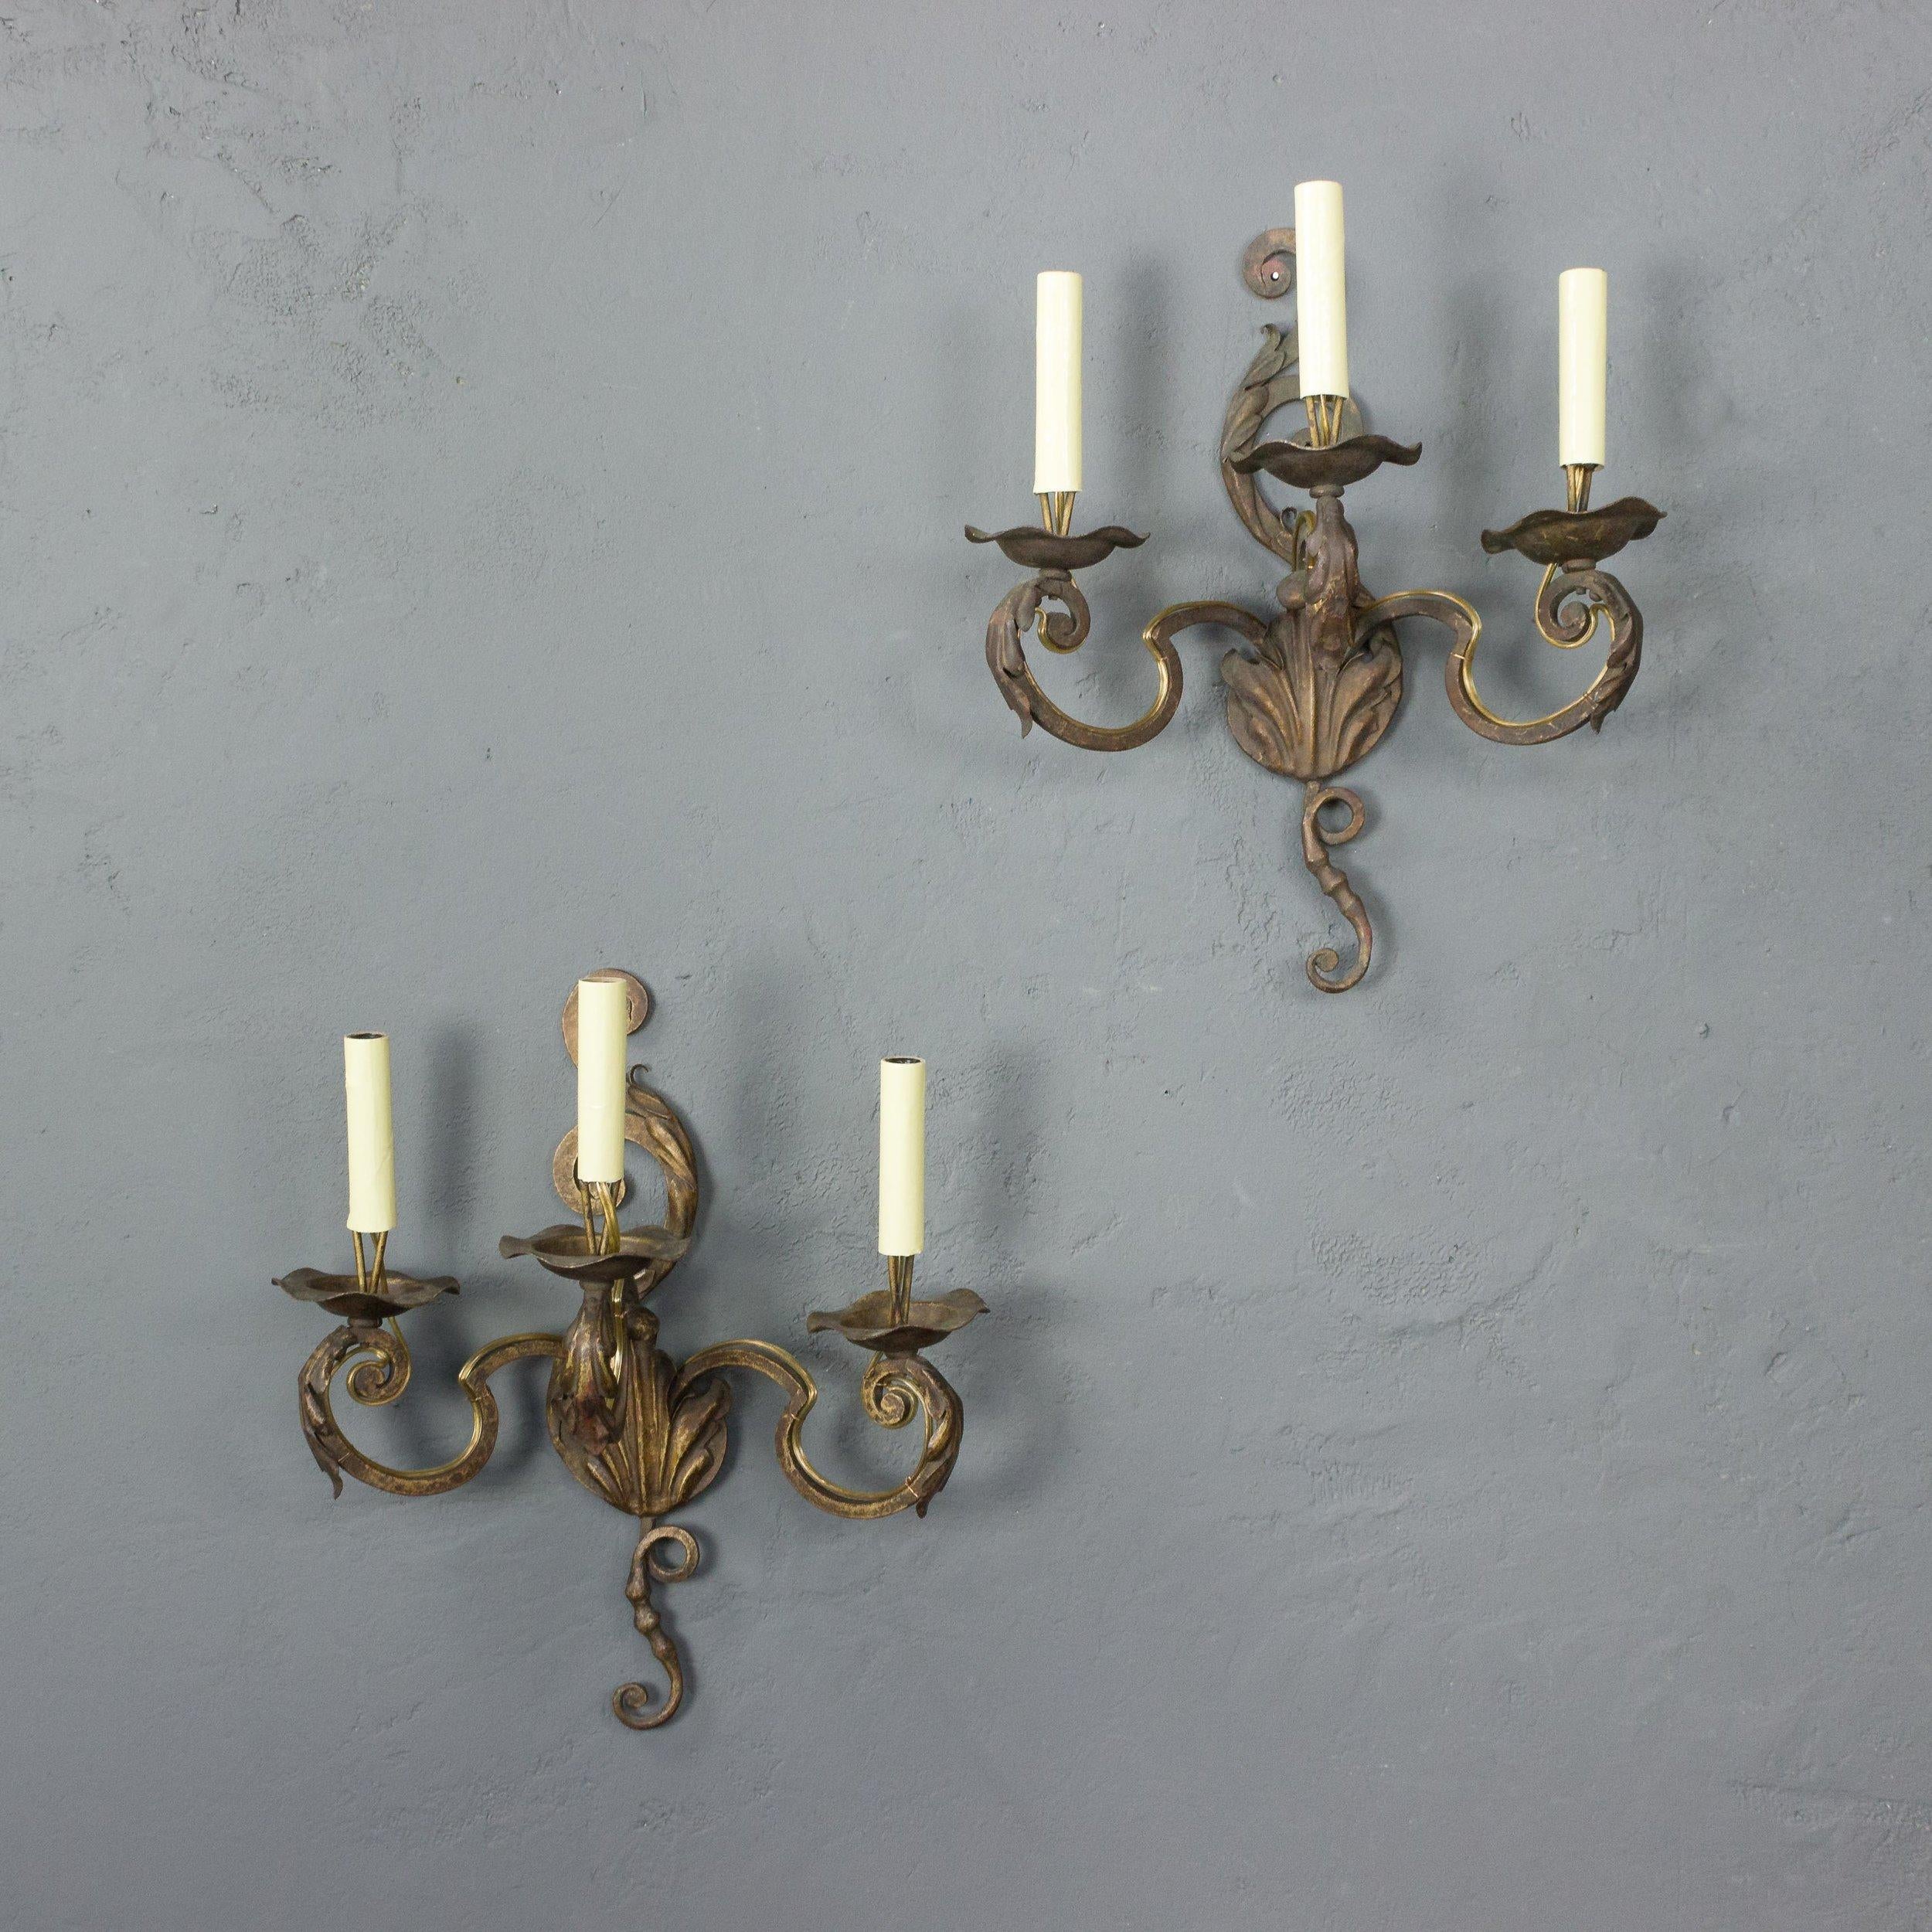 Pair of gilt metal, three armed sconces, wrought iron with applied leaf decorations. French, 1920s. Rewired (not UL listed). Very good vintage condition.

Ref #: LS0317-01

Dimensions: 16